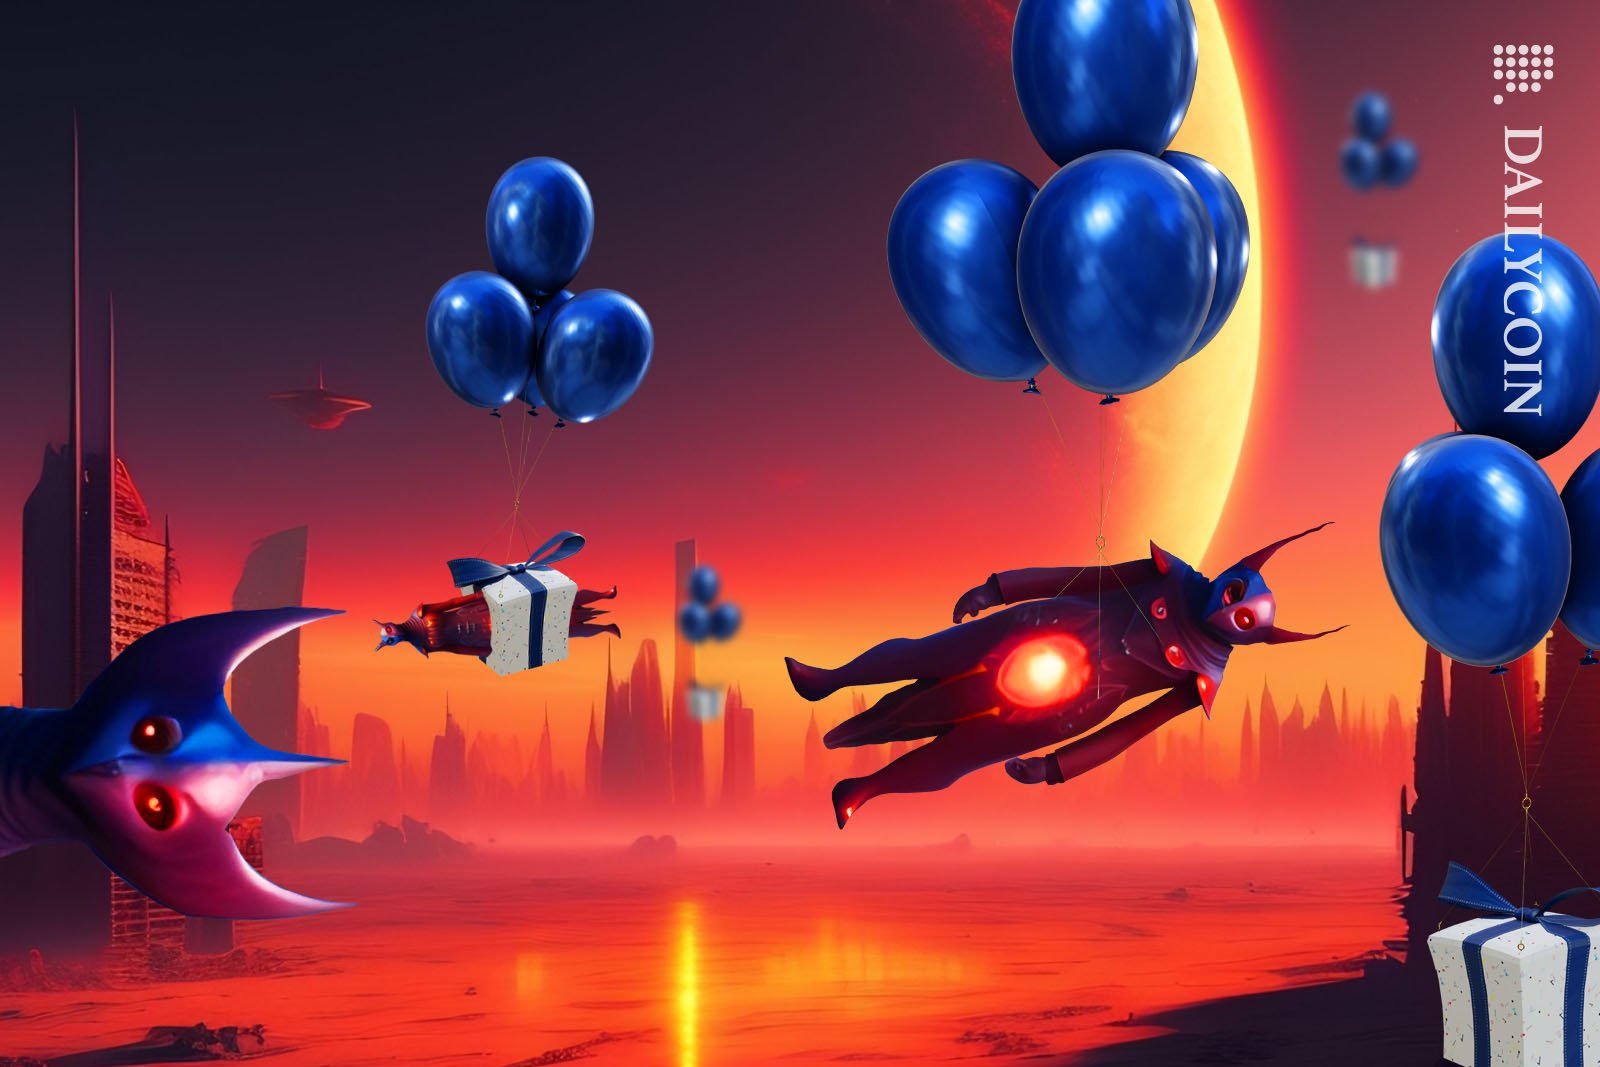 Wierd and spooky monster-like creatures falling from the sky with balloons in giftboxes.